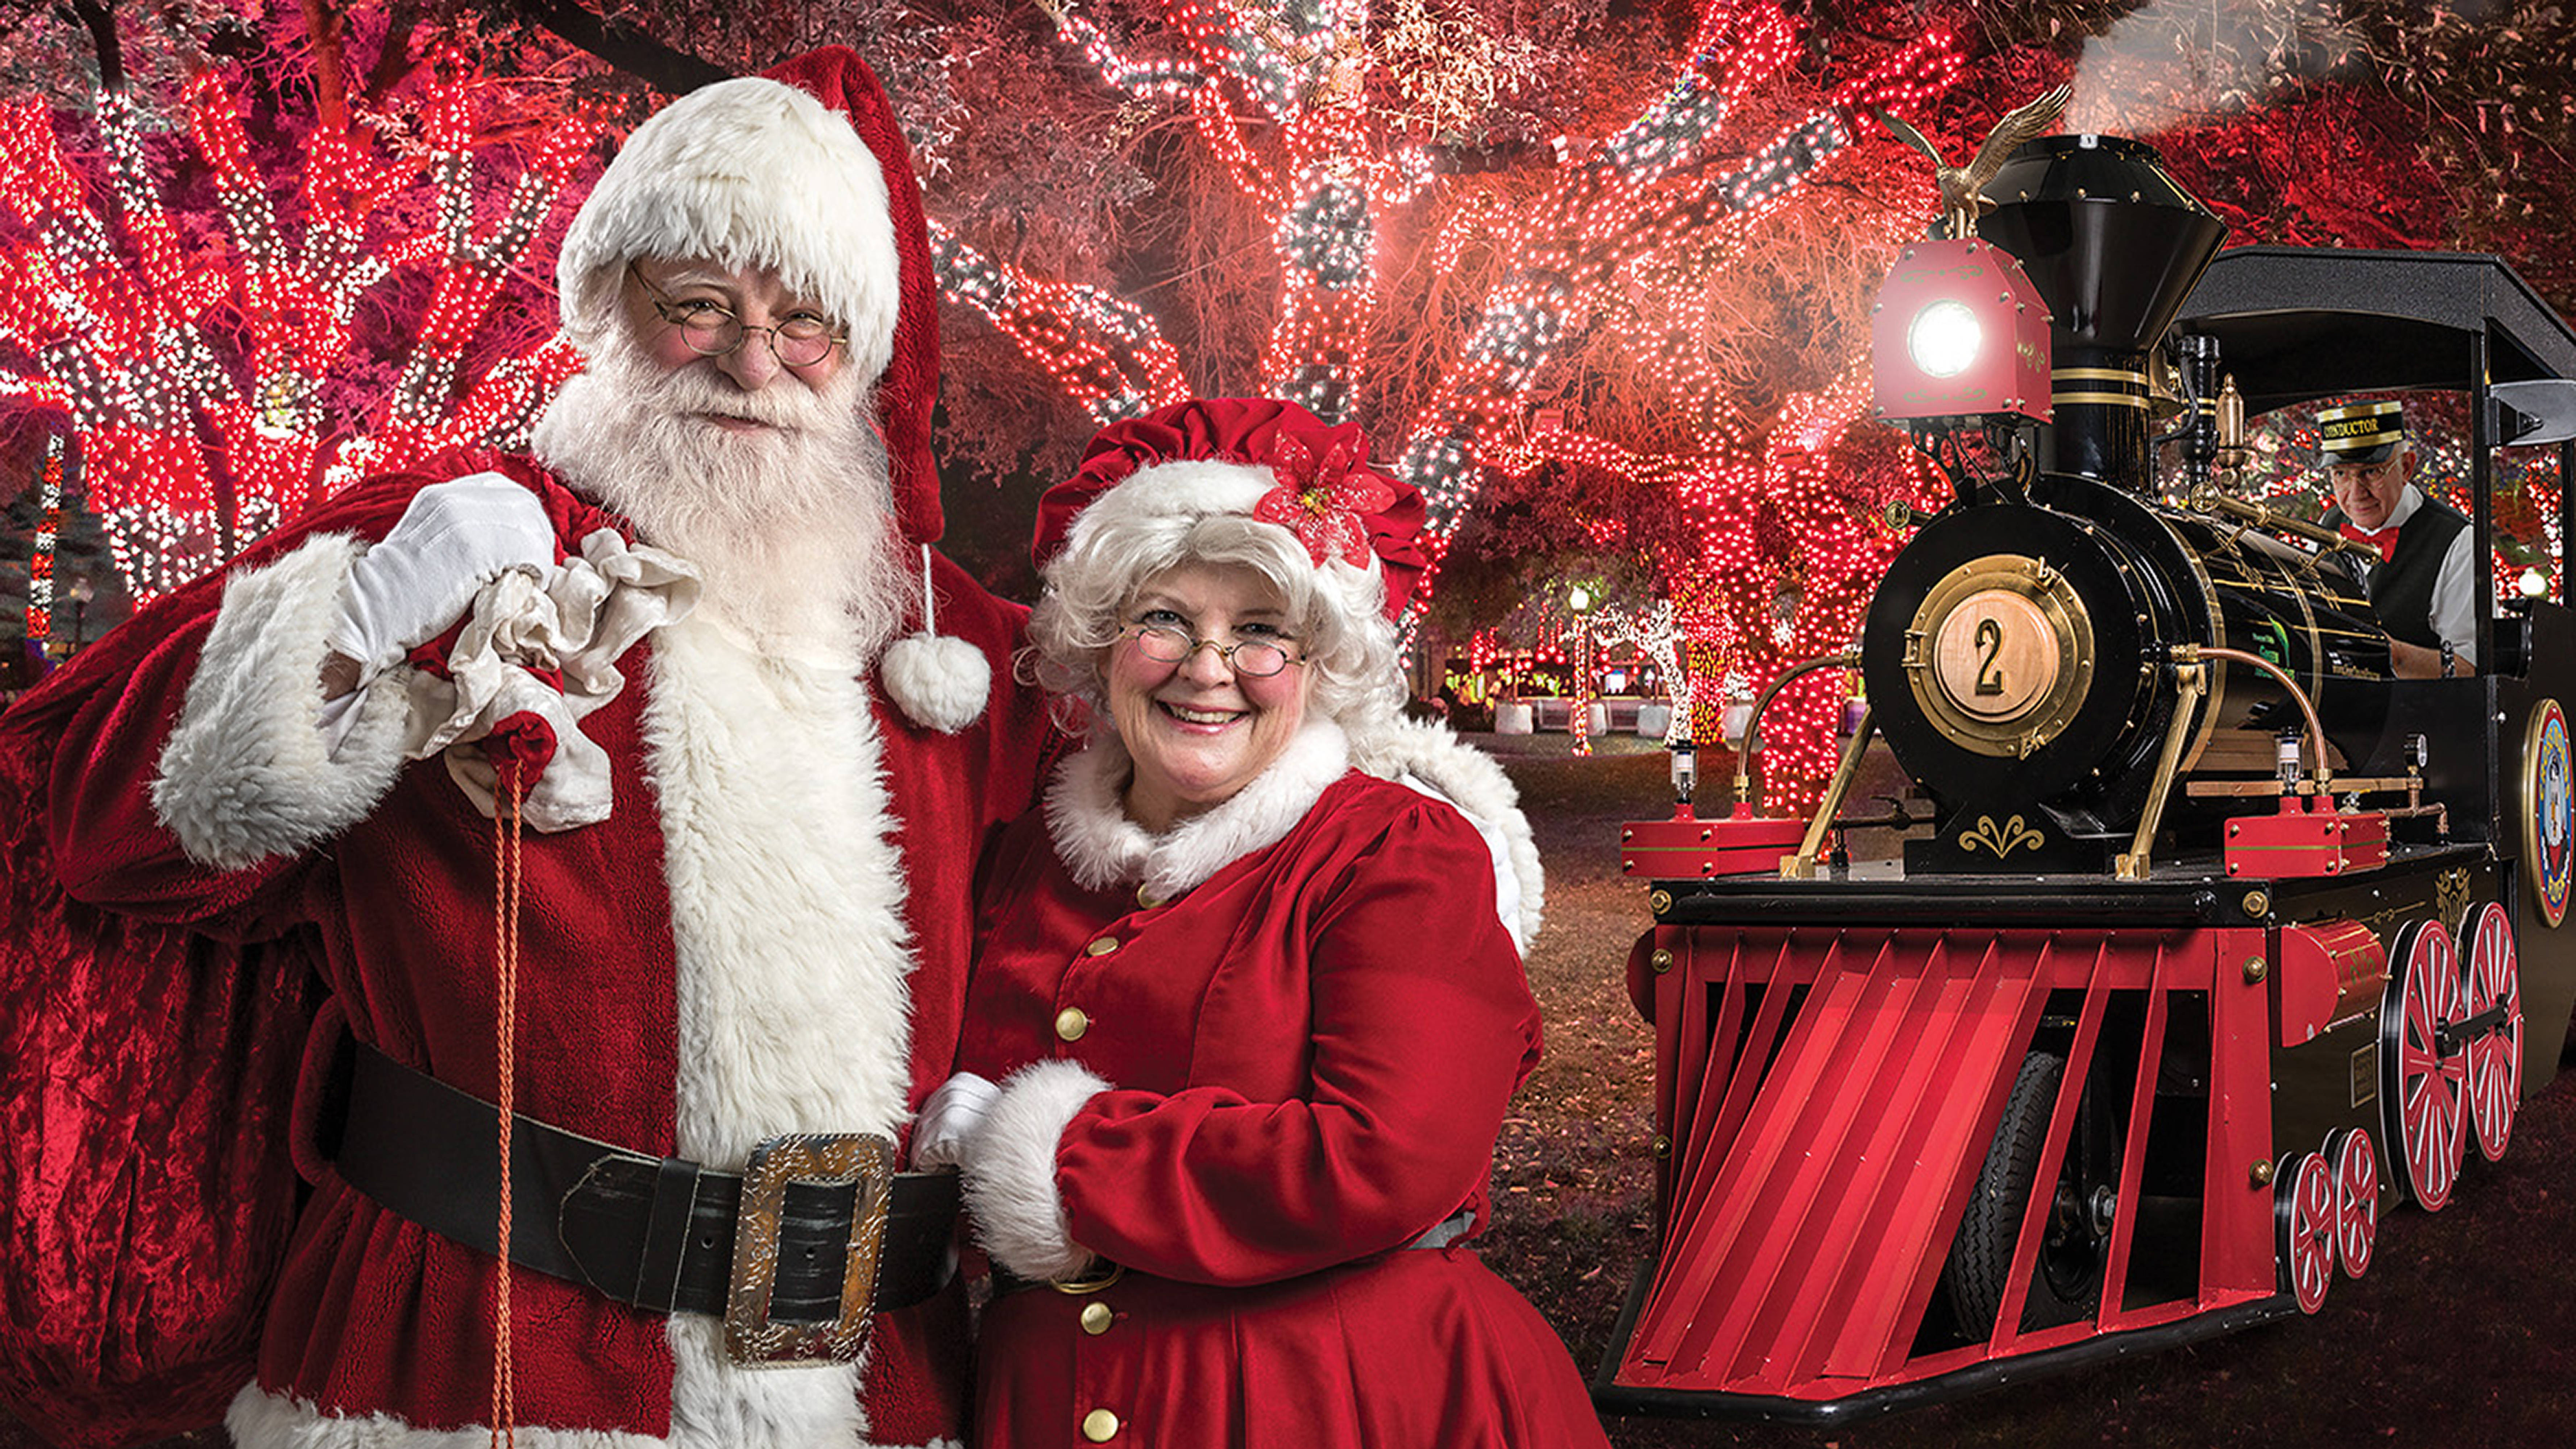 Image of Santa and Mrs. Claus with train and conductor in background